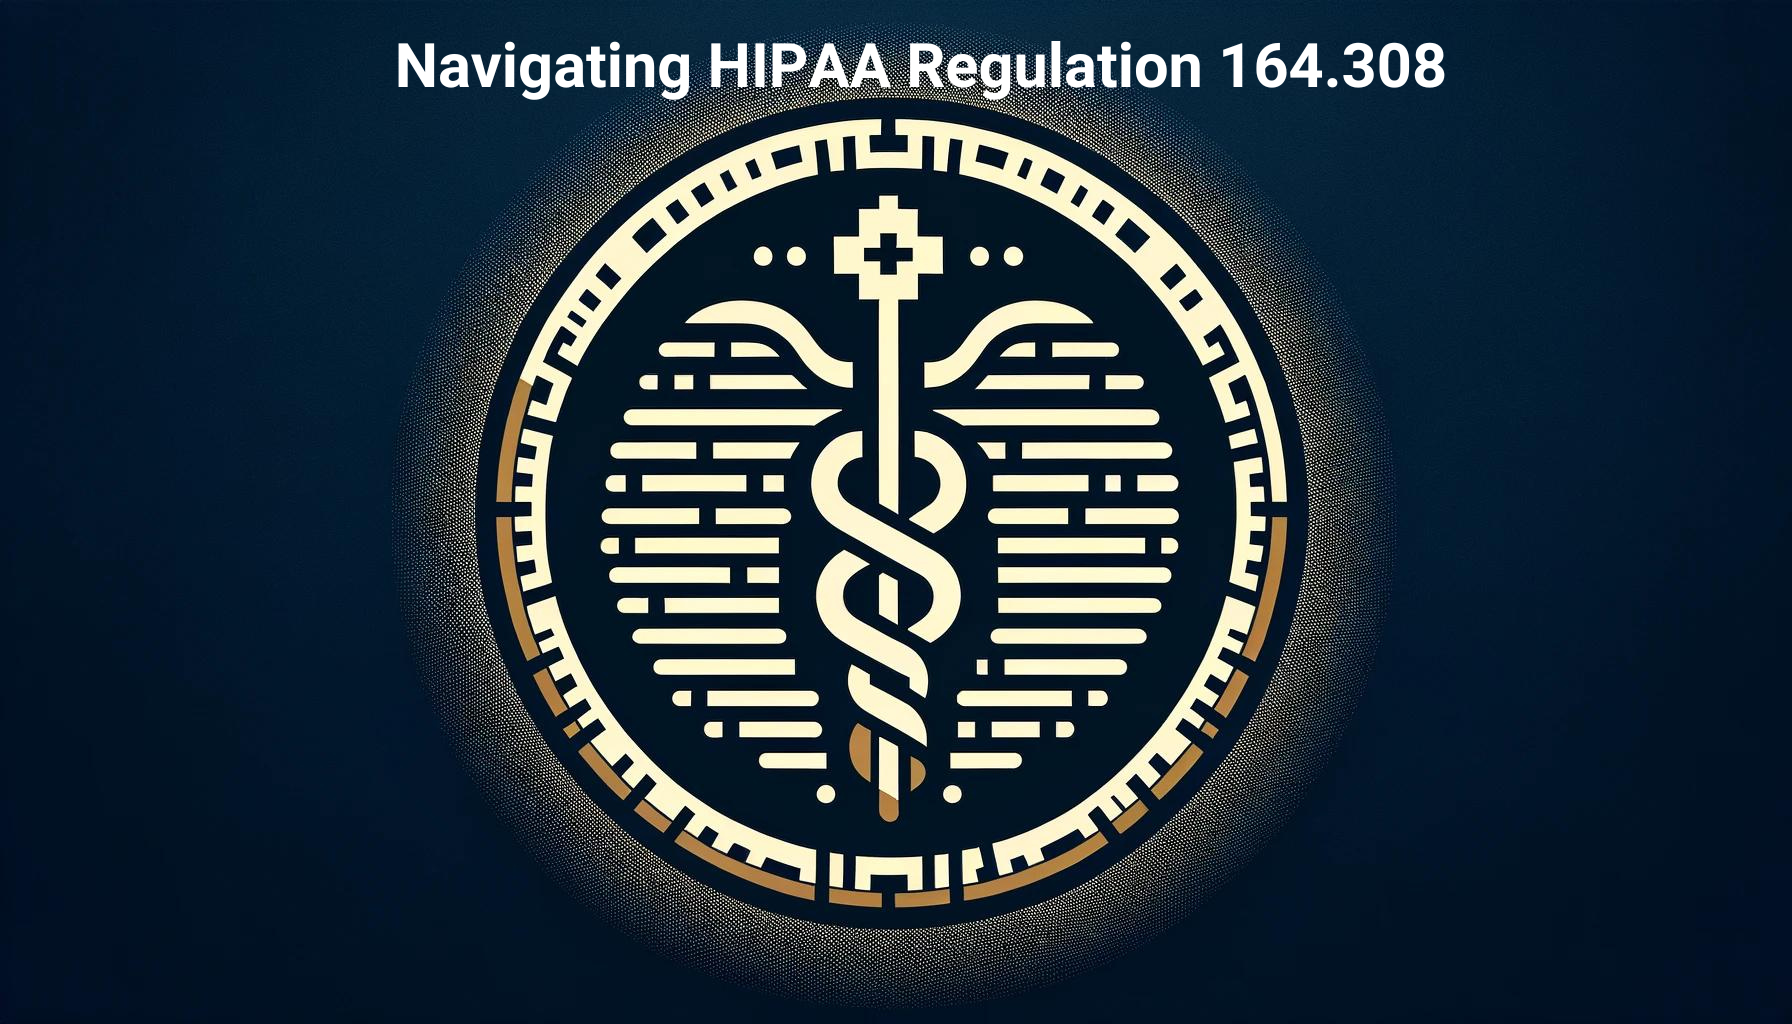 Navigating HIPAA Regulation 164.308: Administrative Safeguards for Healthcare Practices